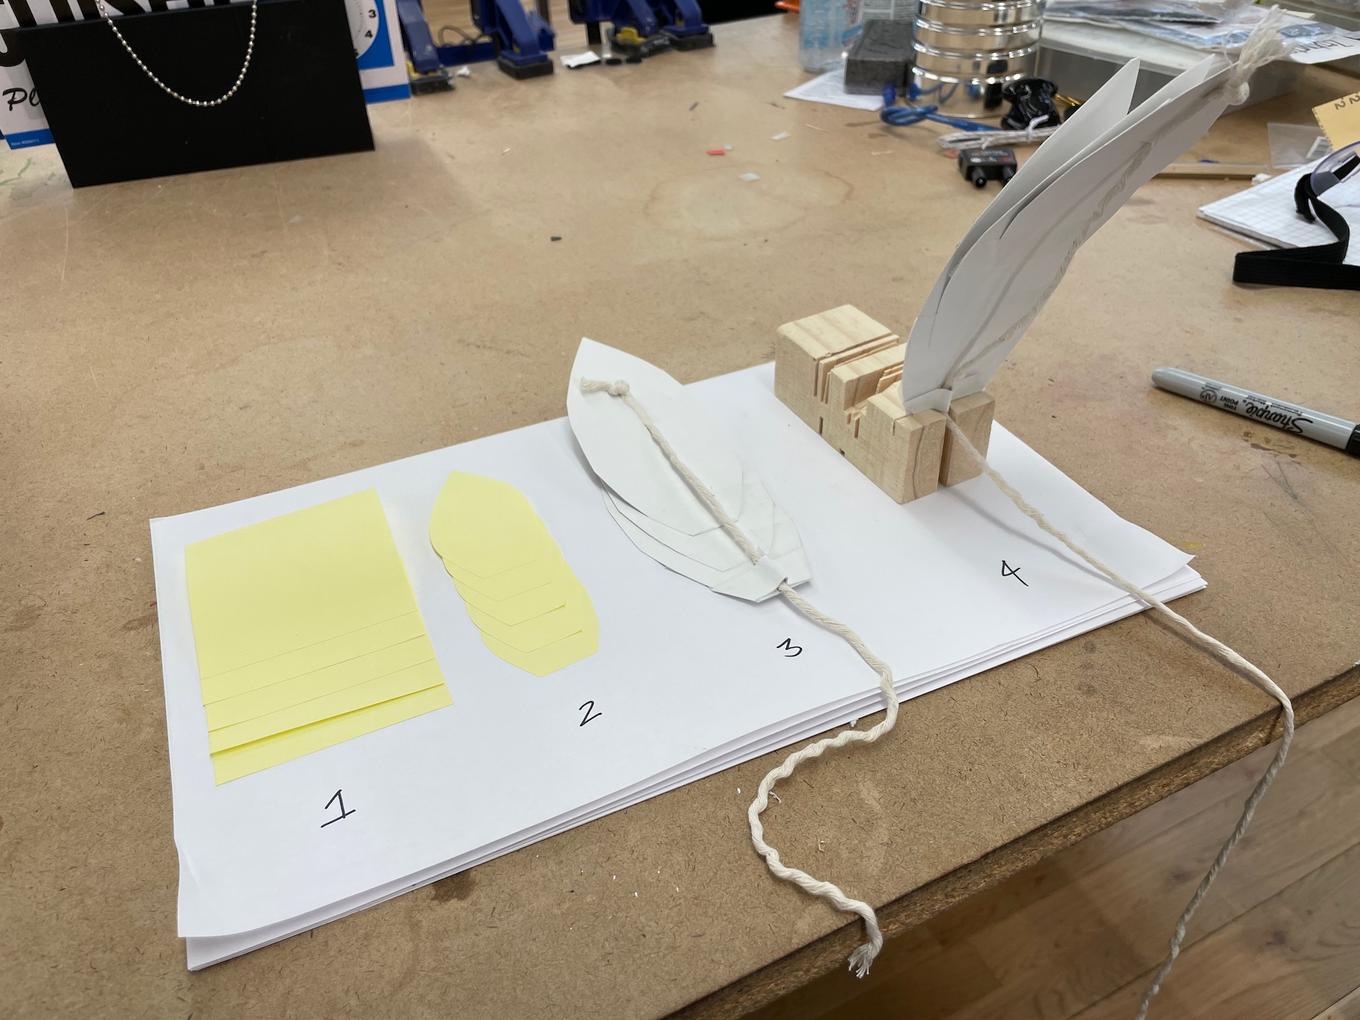 Layered paper for motion tests